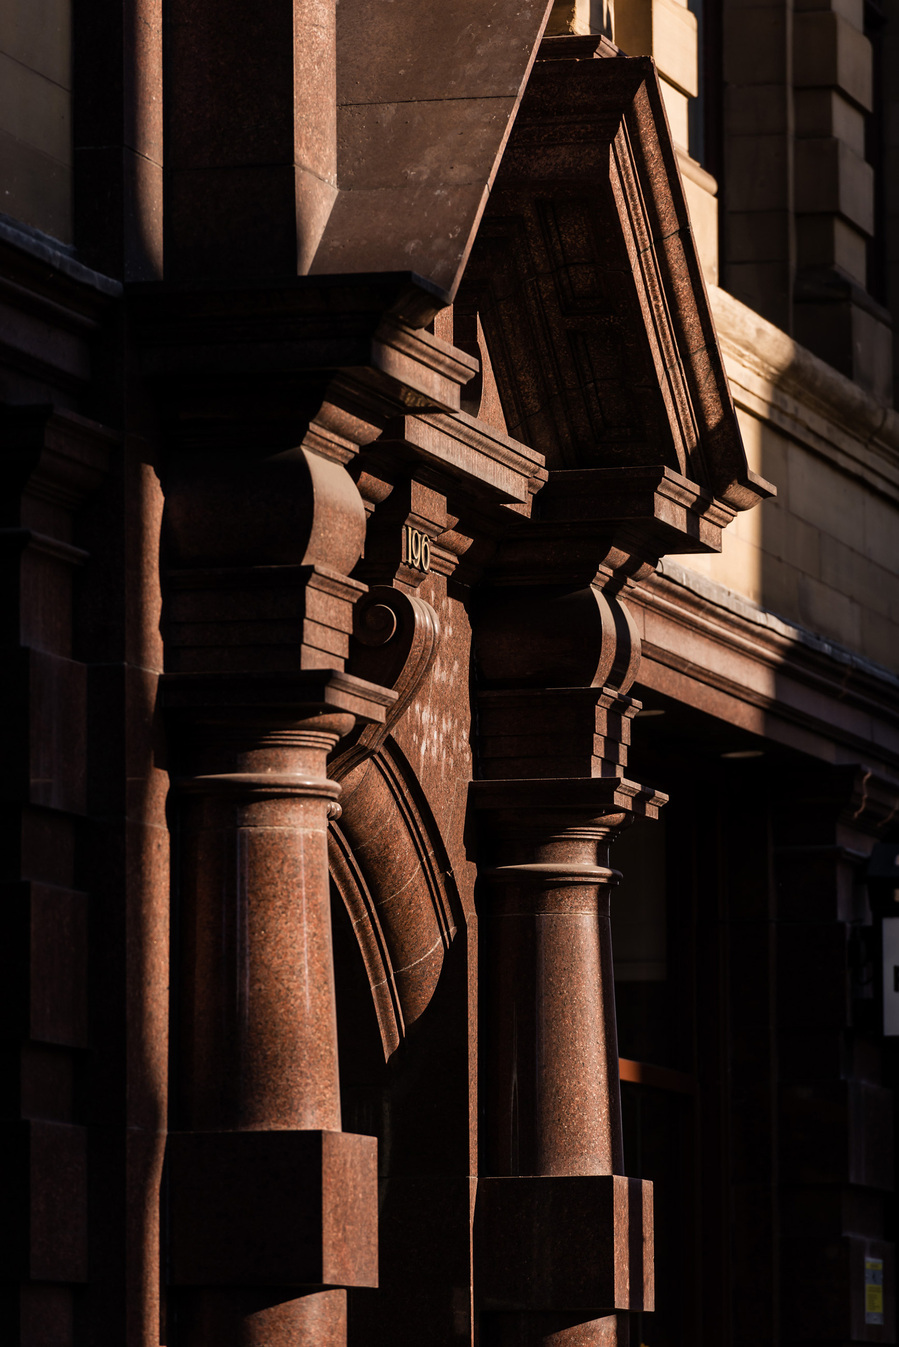 classic manchester architecture. city centre building. photographed with shadows across frontage of brickwork